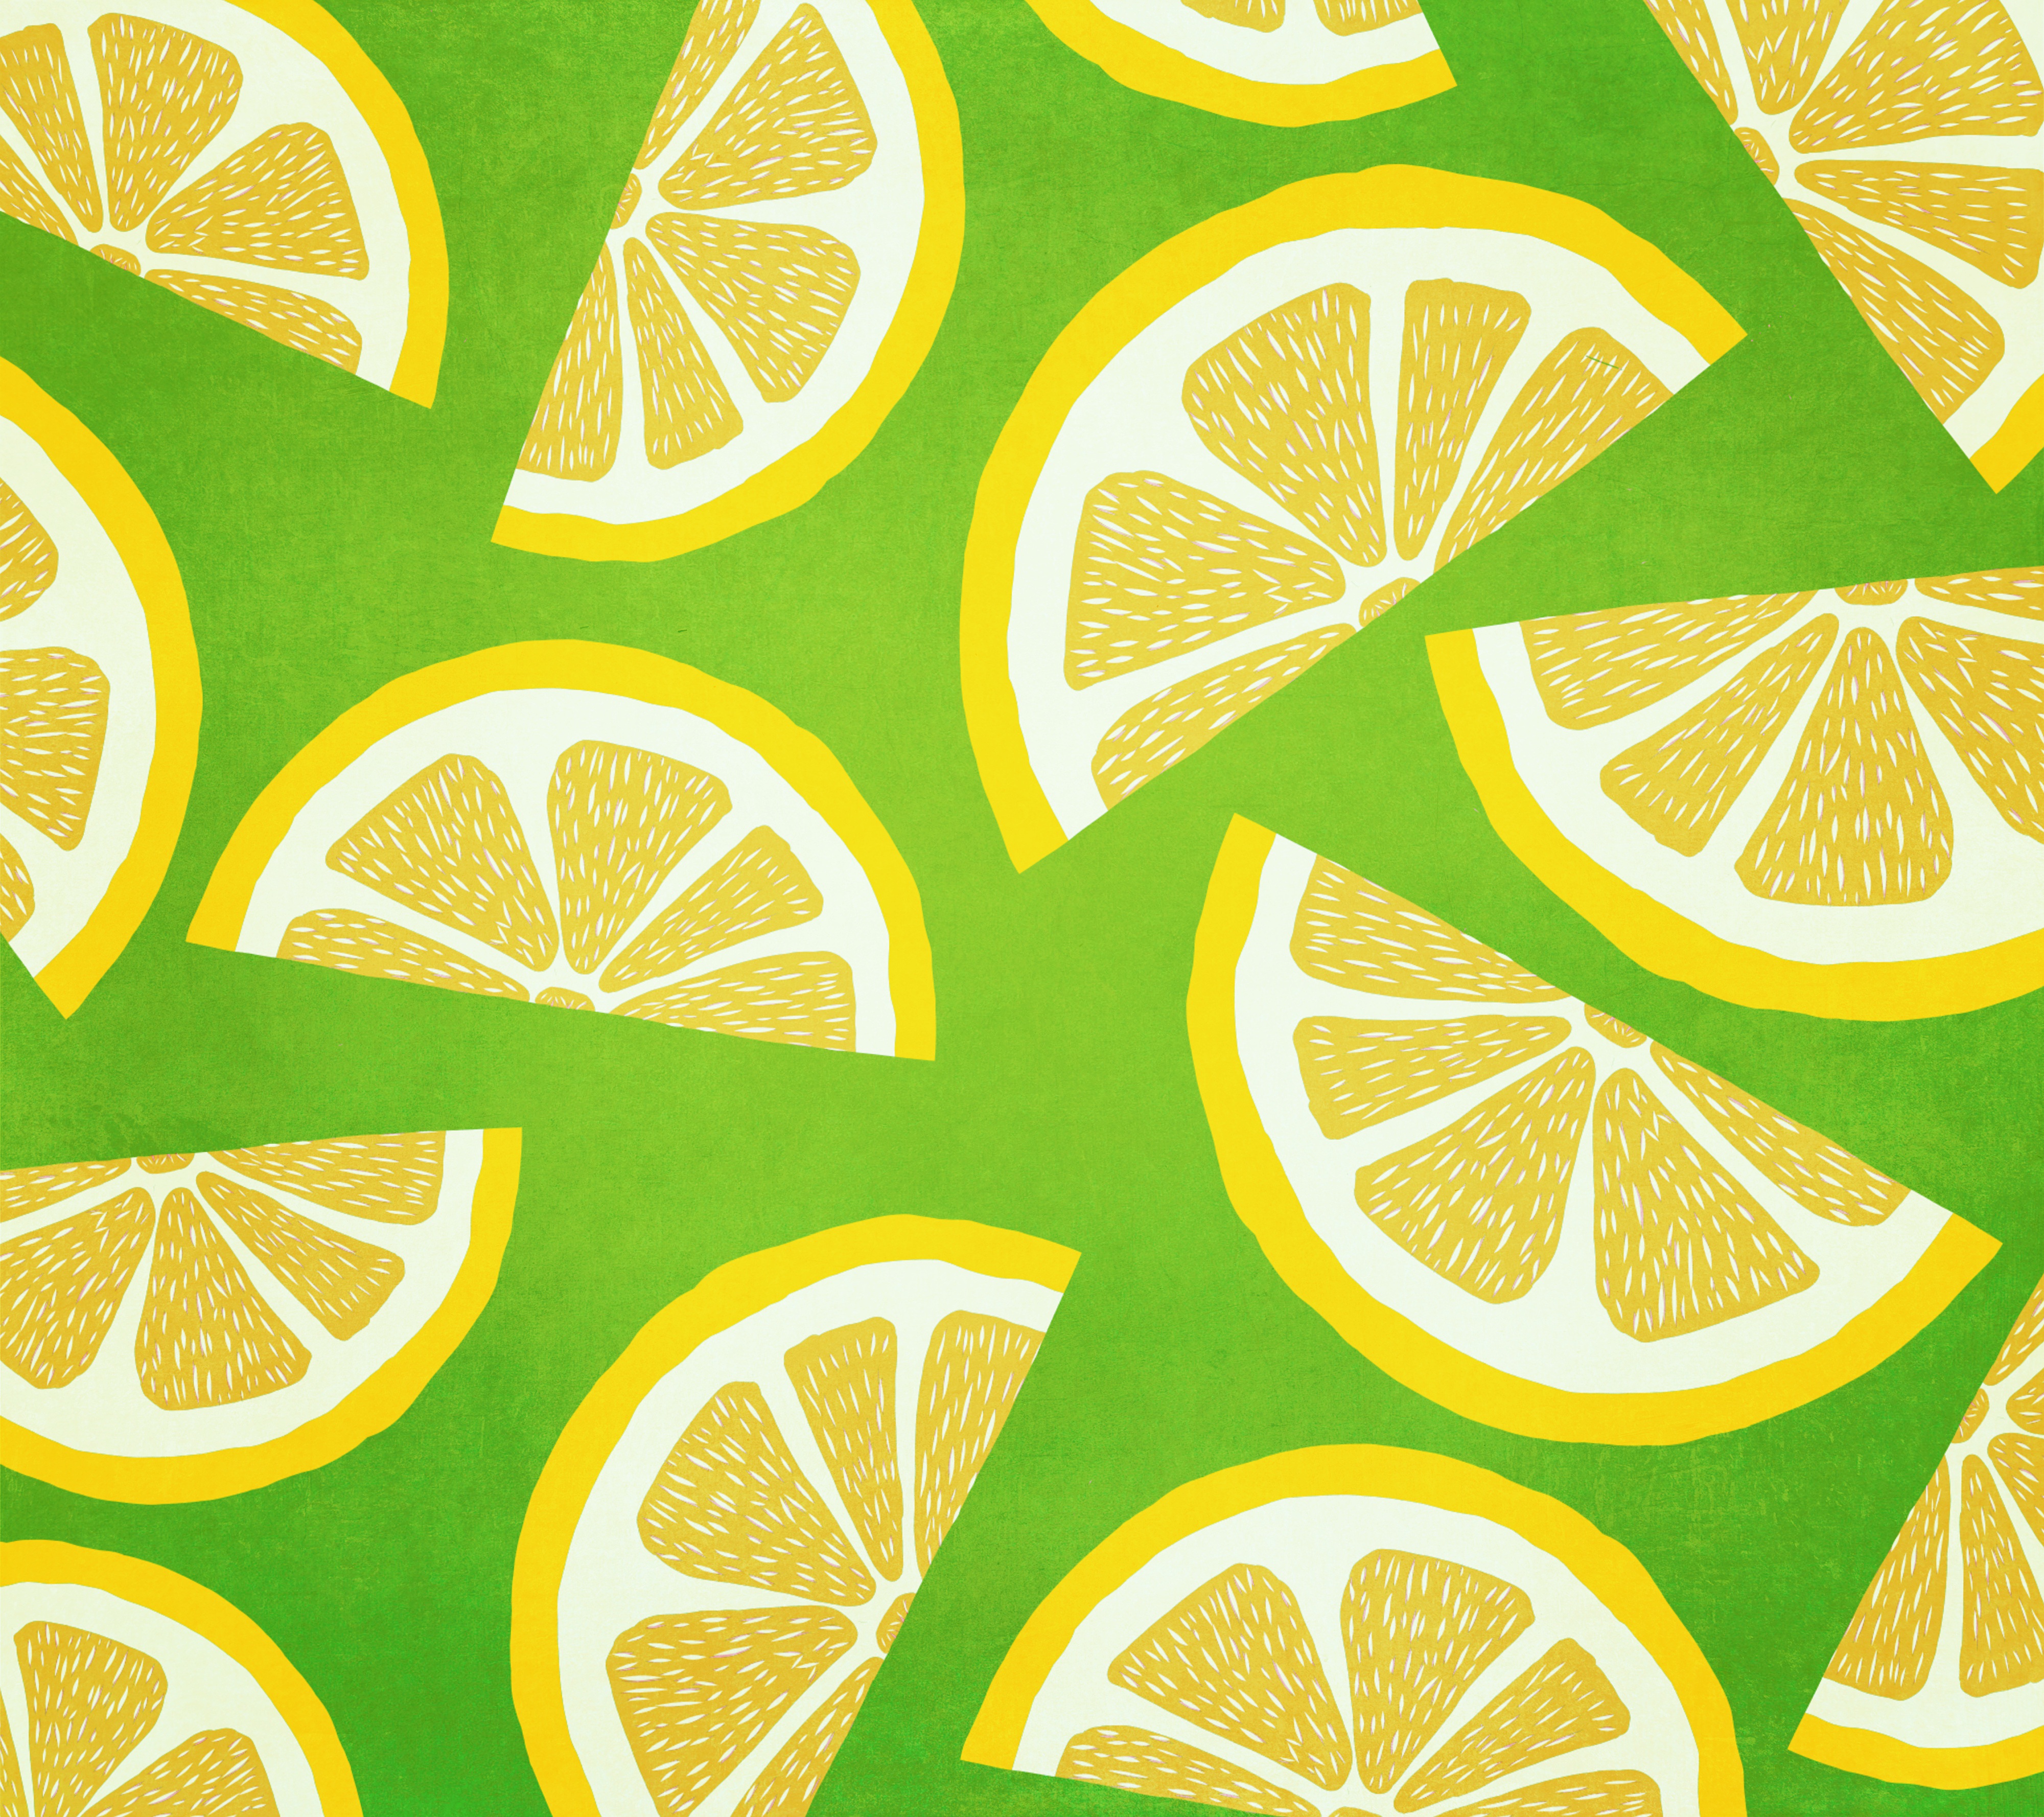 129145 Screensavers and Wallpapers Lemon for phone. Download textures, yellow, pattern, texture, lemon, citrus, lobules, slices pictures for free